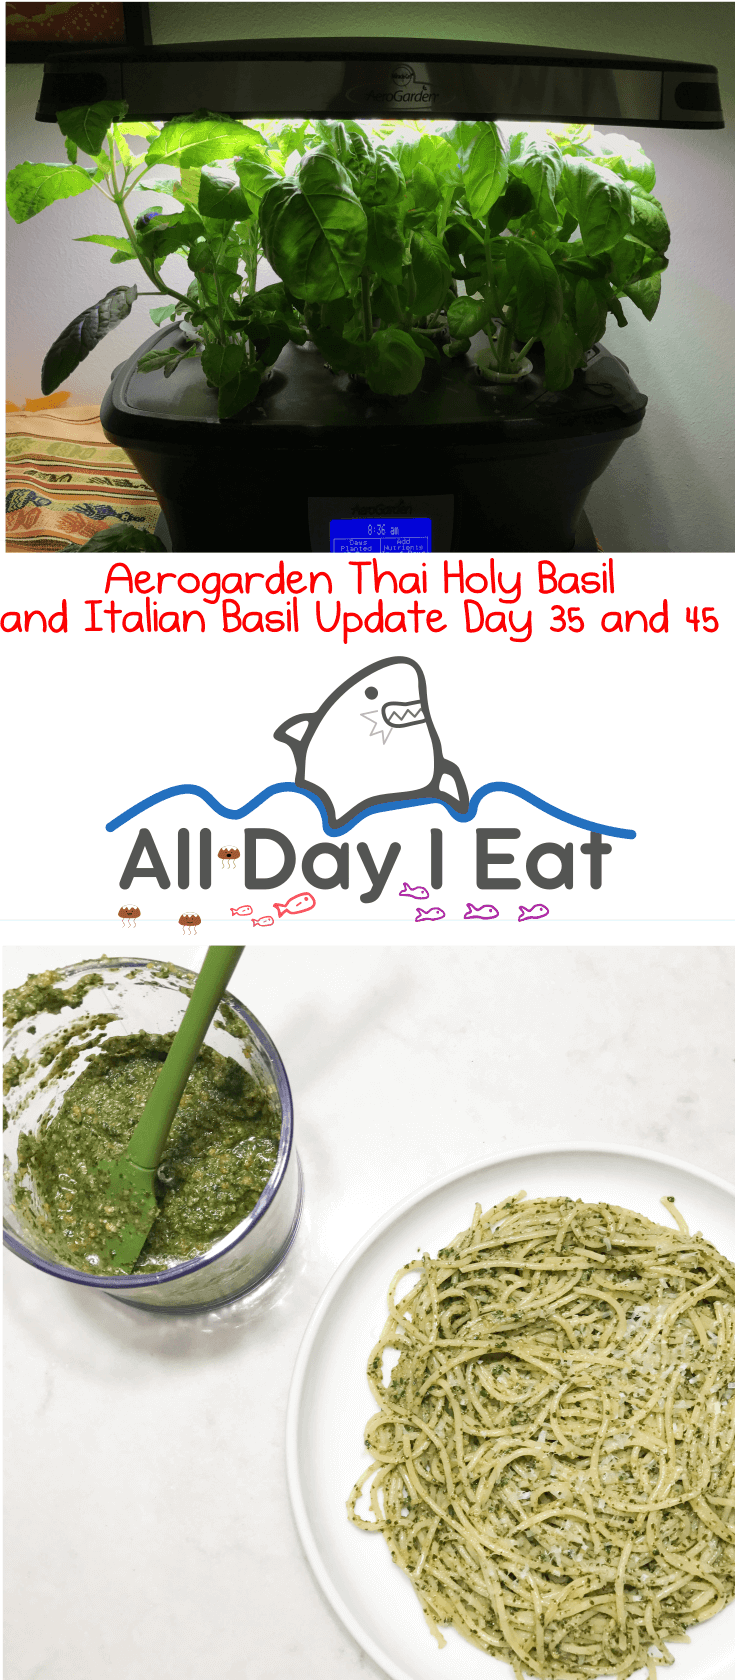 Aerogarden Thai Holy Basil (tulsi) and Italian Basil Update Day 35 and 45. I finally got to take my first harvest of Italian basil and made pesto with it. Can't wait to make Thai Basil Chicken with this thing!!| www.alldayieat.com